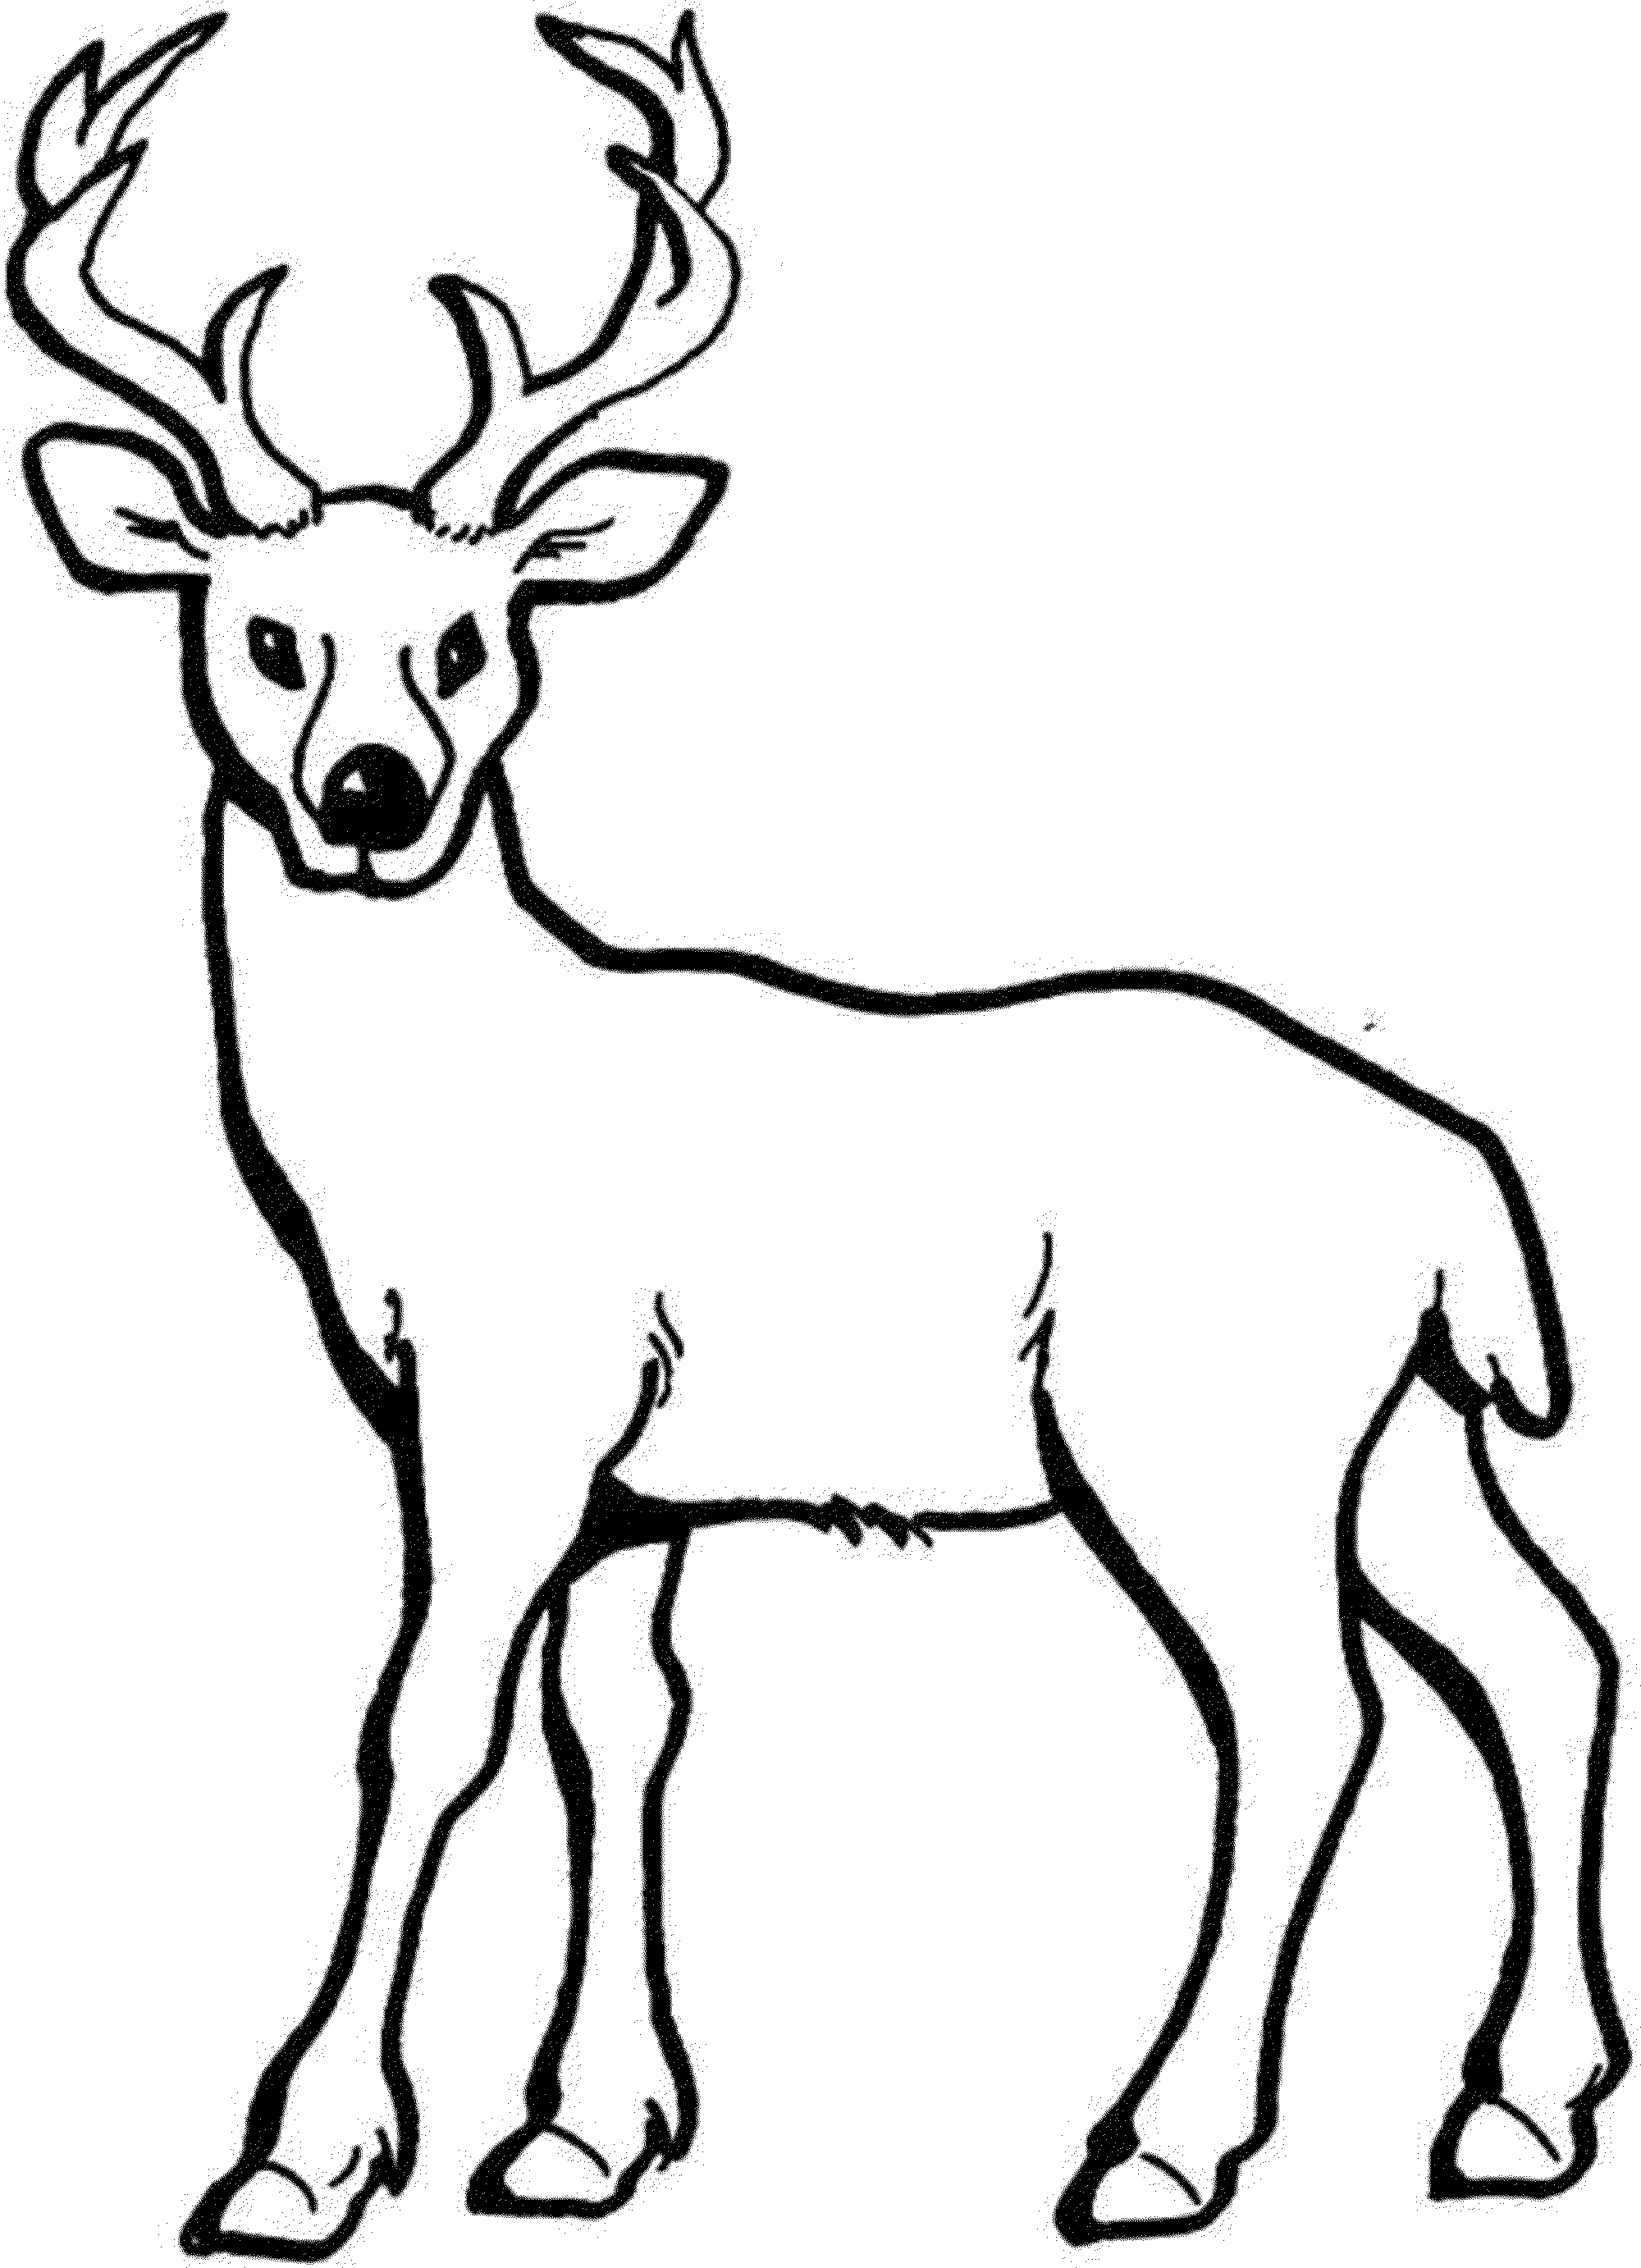 567 Cartoon Baby Deer Coloring Pages for Kids